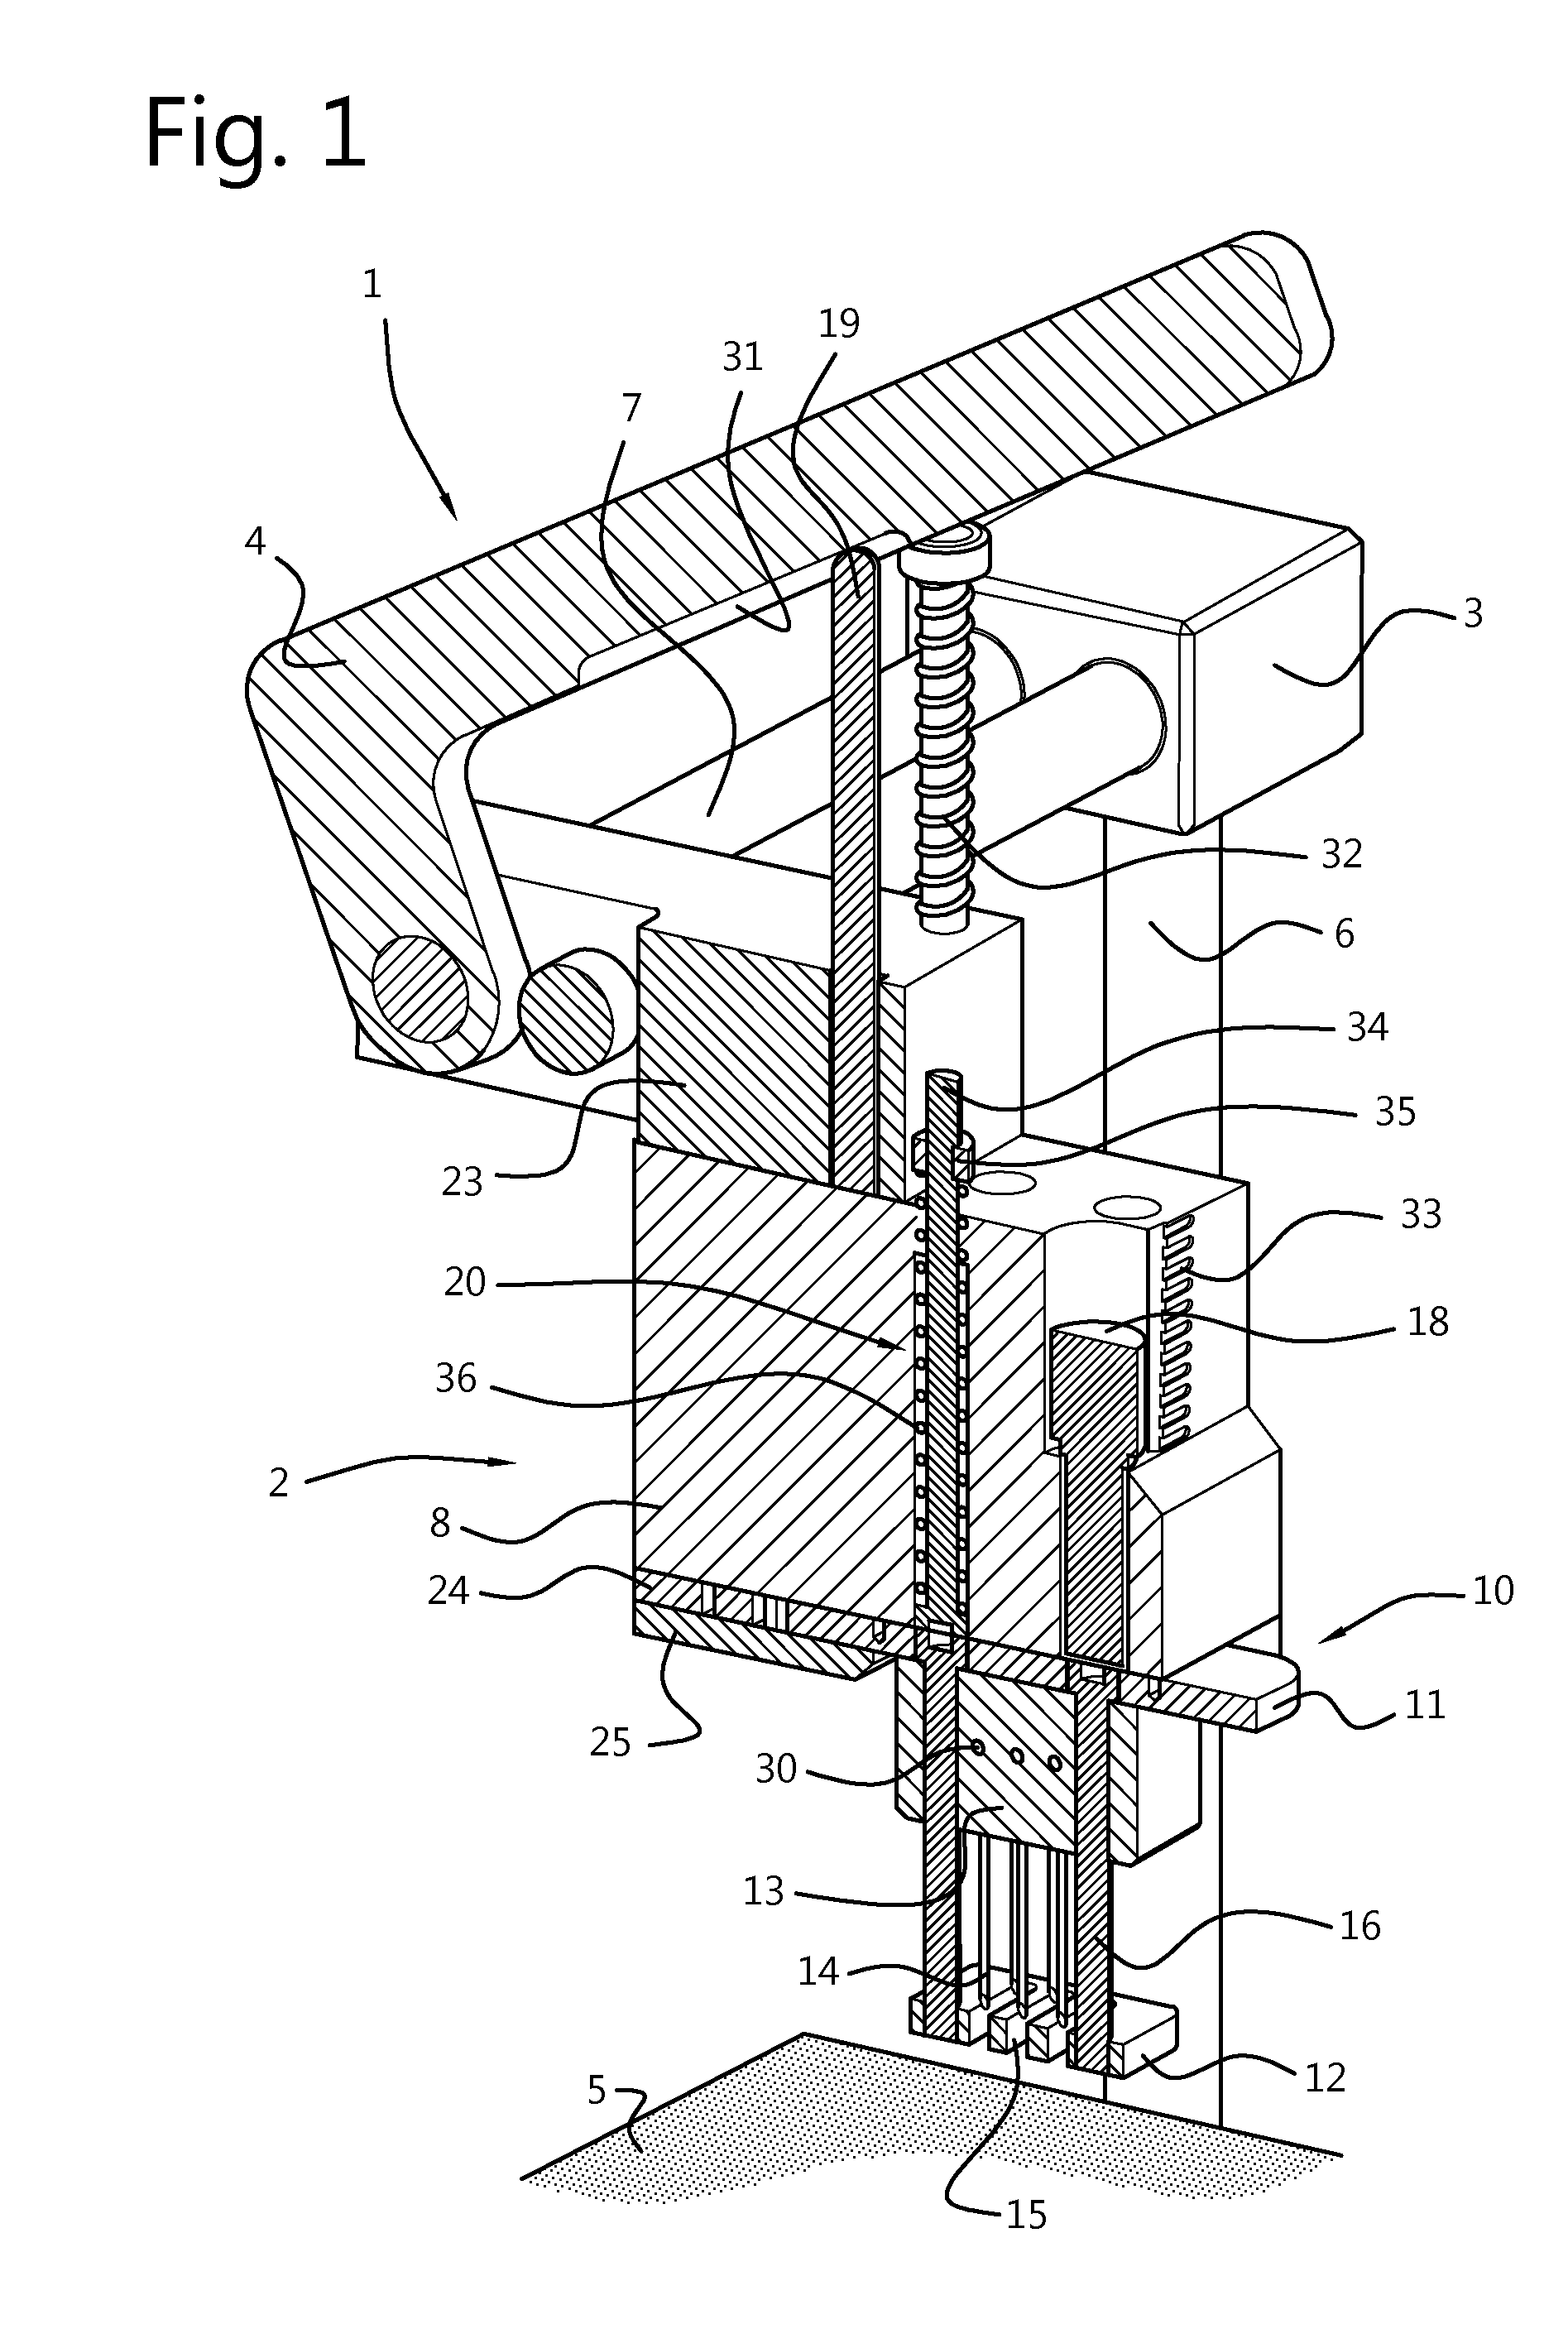 Apparatus for treating a tennis elbow by means of percutaneous intervention, as well as a holder for use with such an apparatus